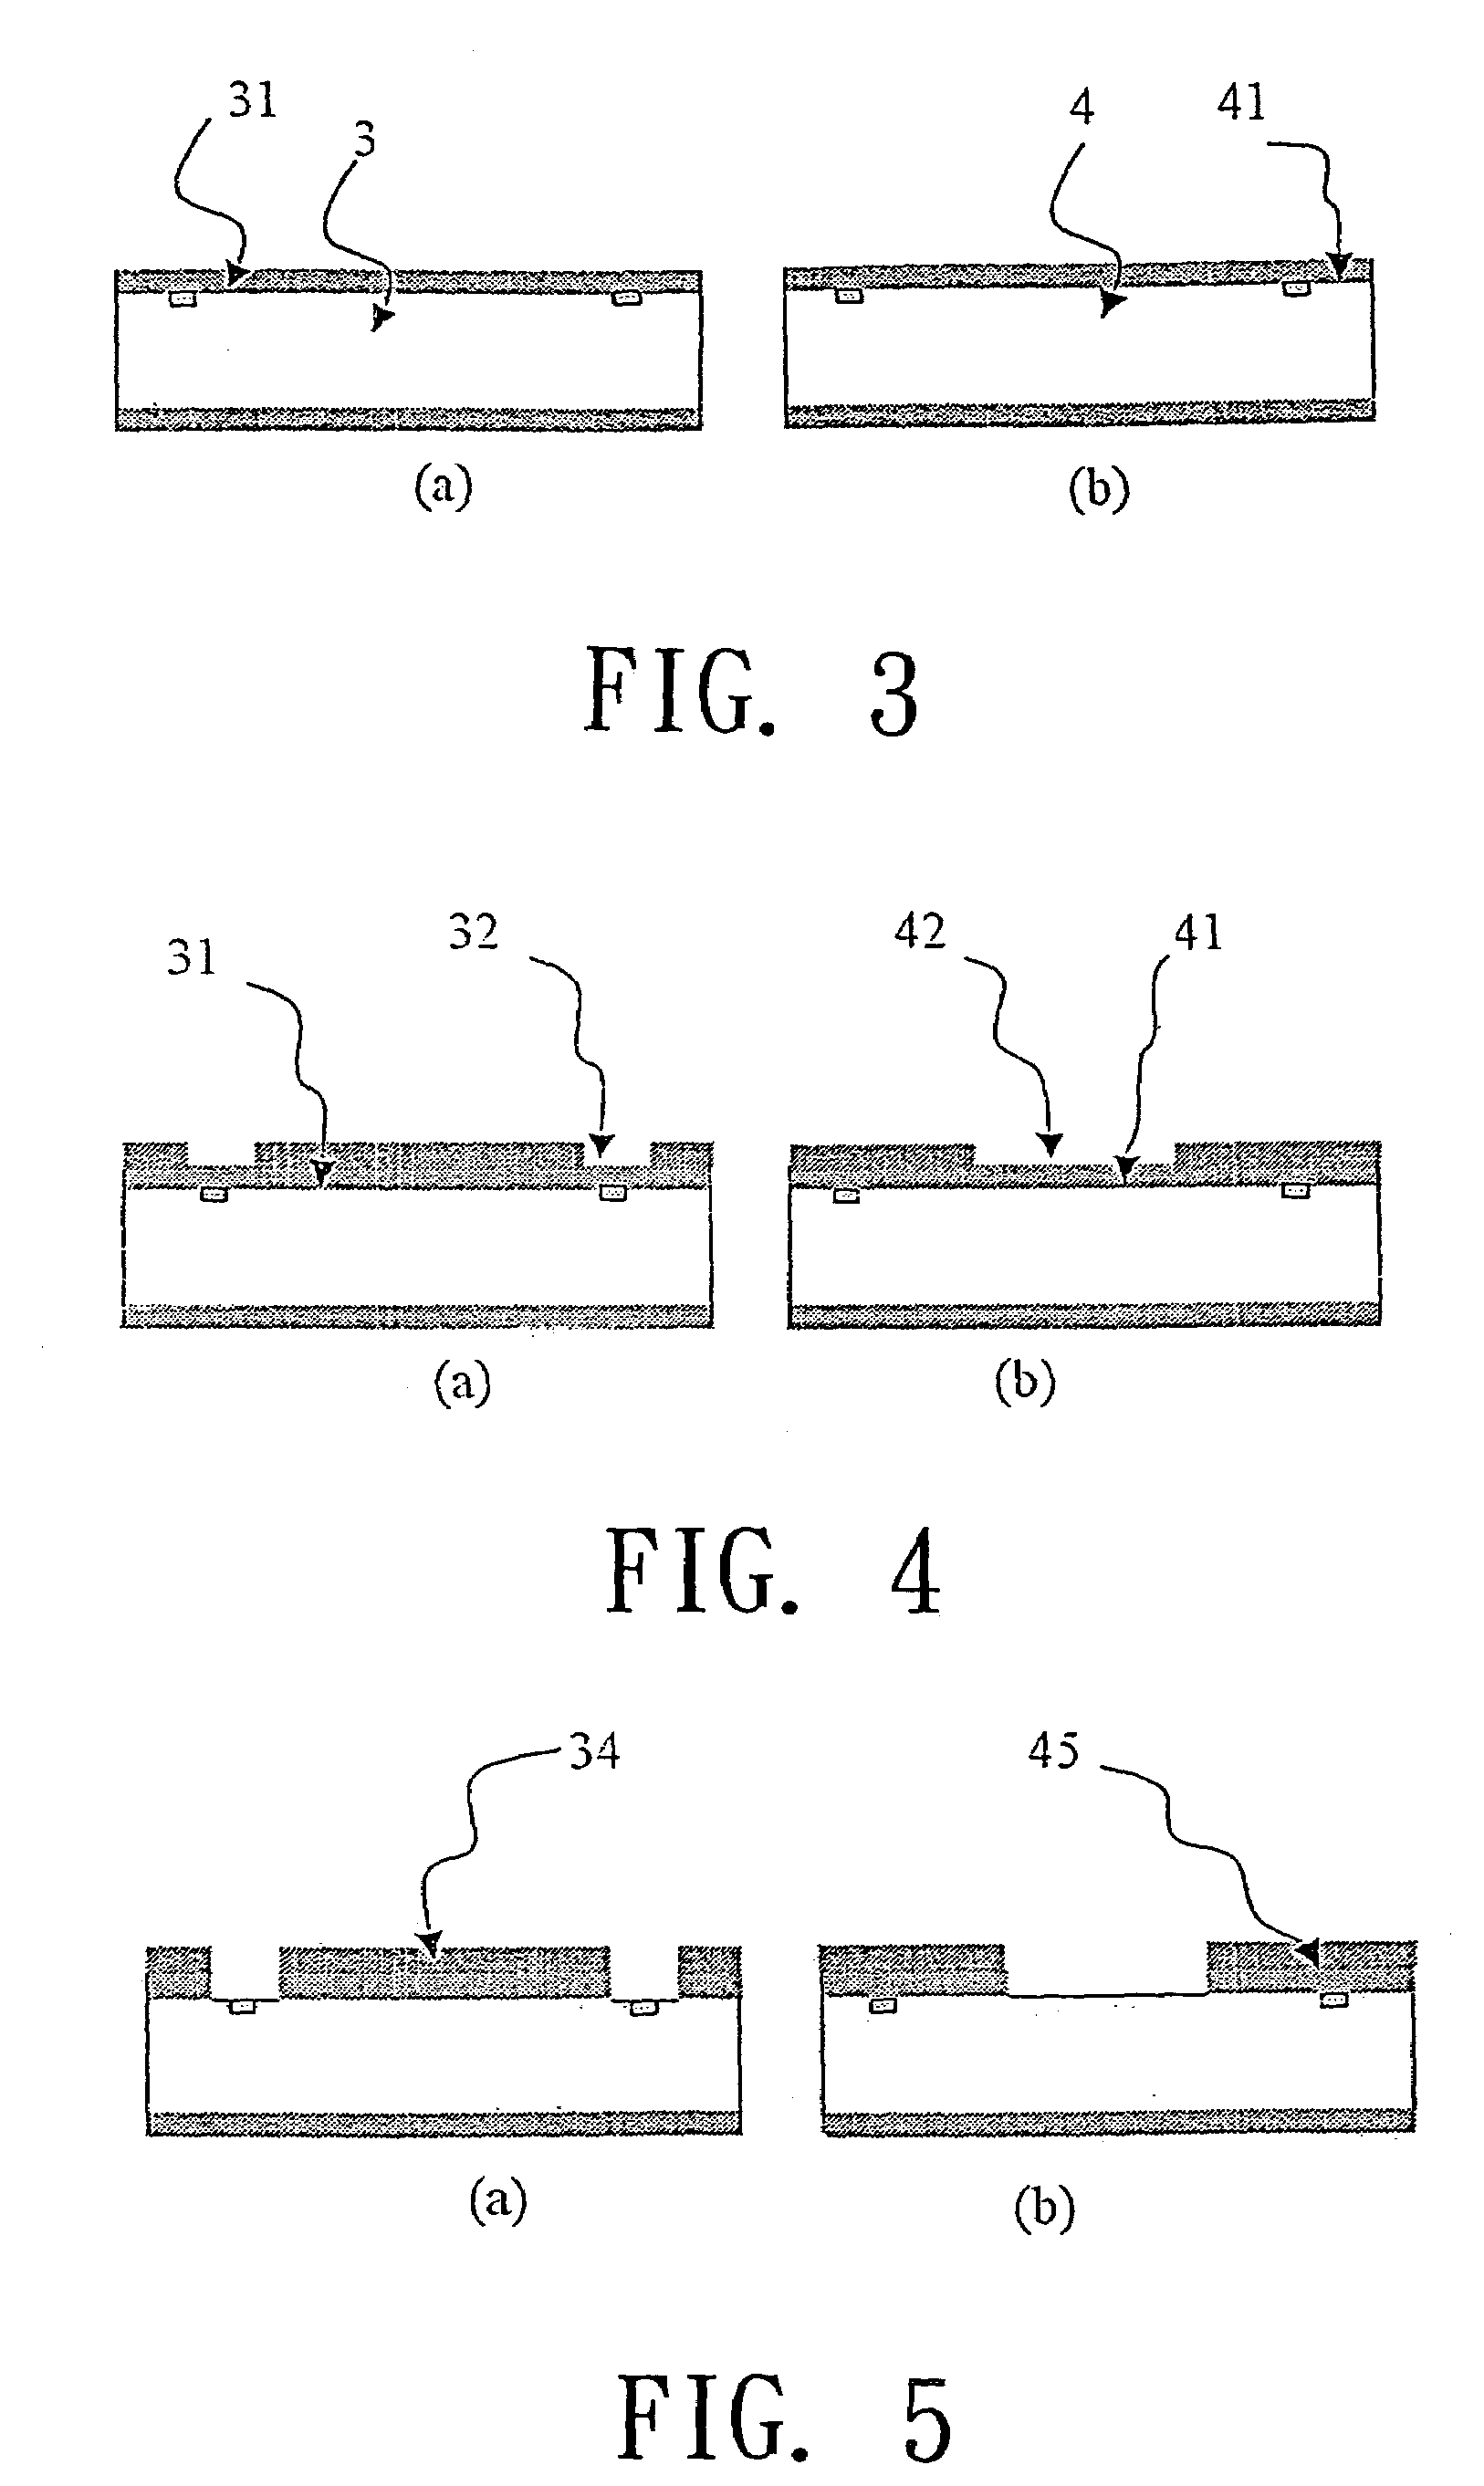 Method of maintaining photolithographic precision alignment after wafer bonding process